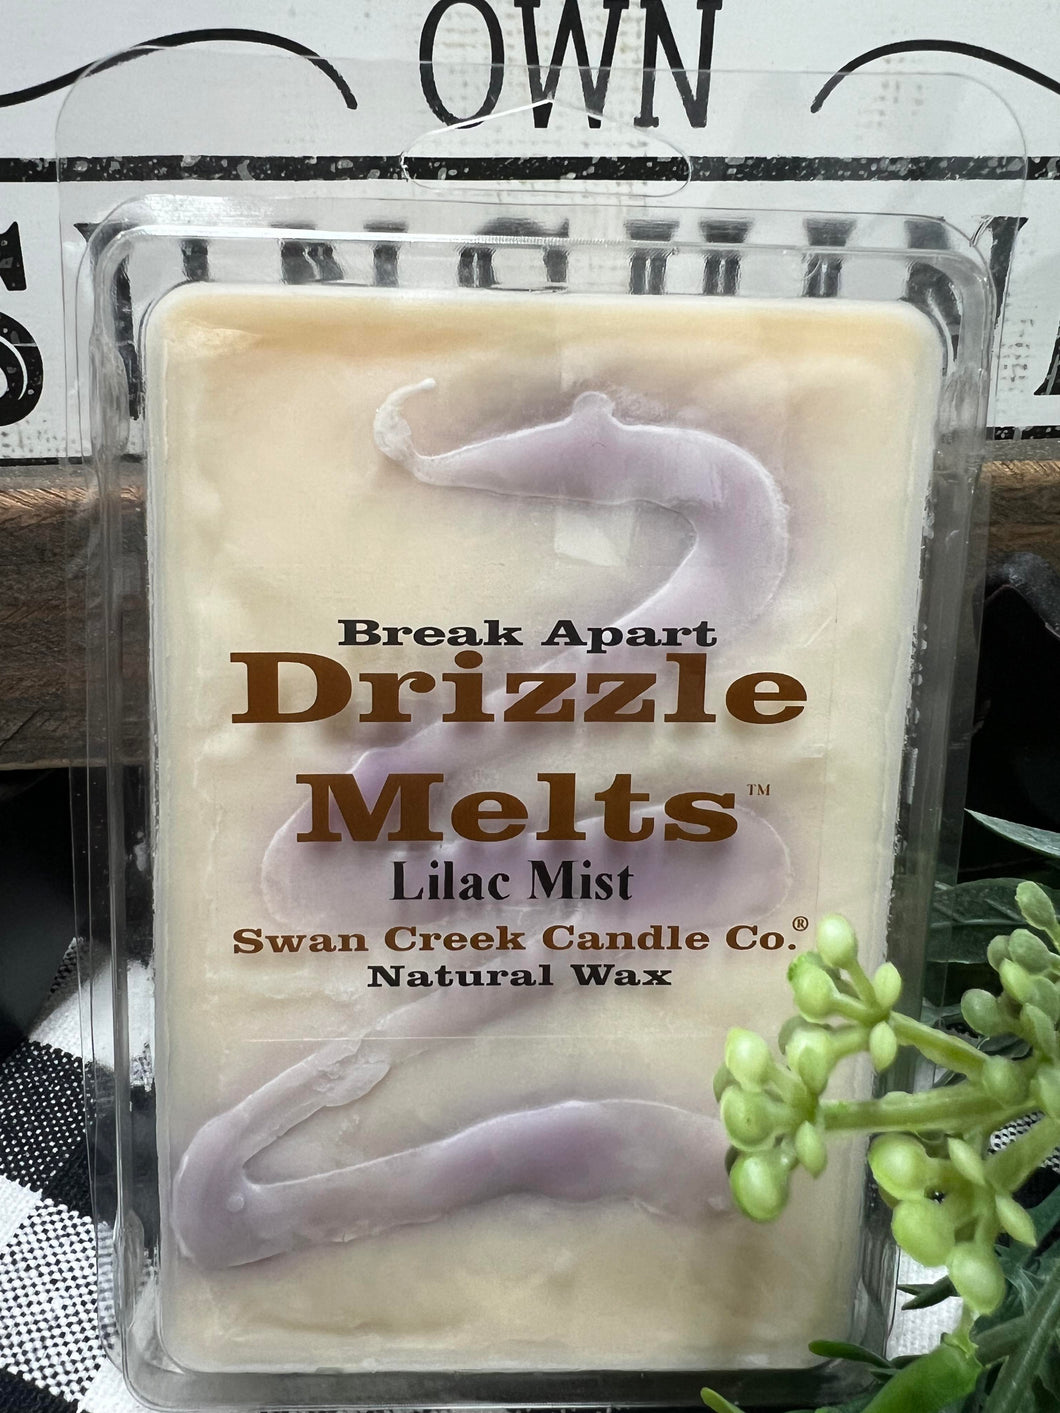 Swan Creek Candle Co. Lilac Mist Drizzle Melts